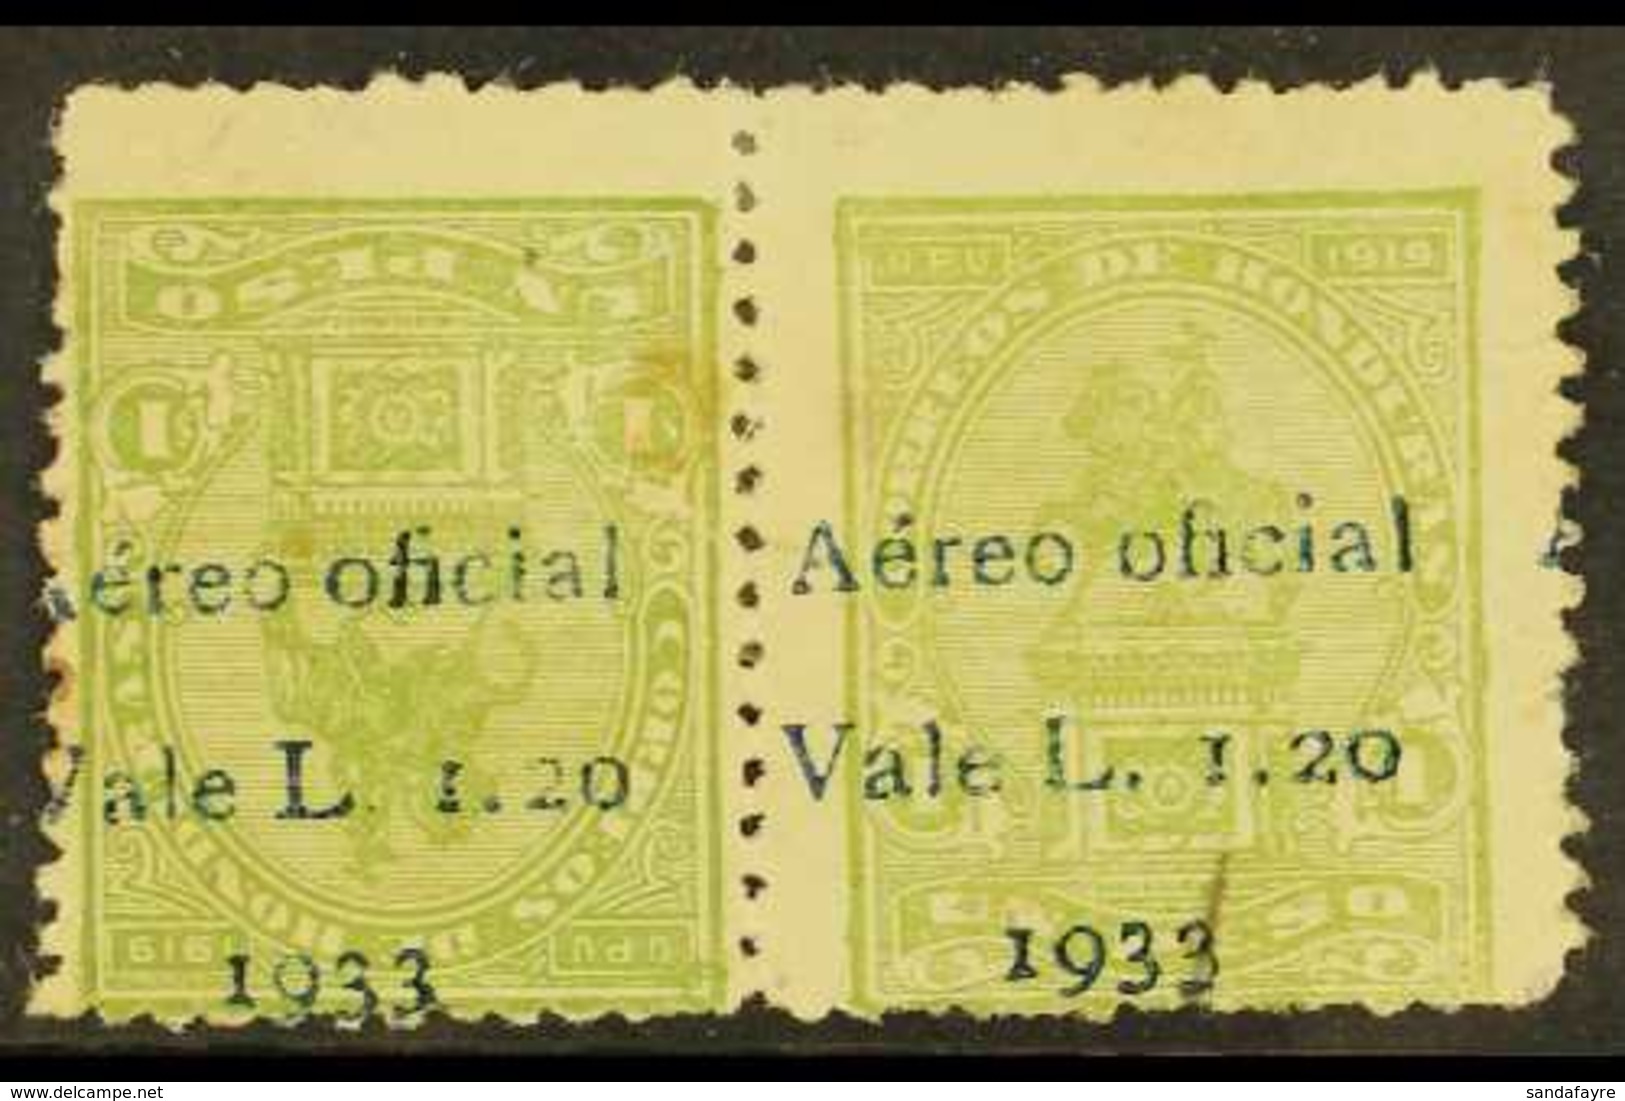 1933 OFFICIAL AIR 1.20L On 1p Yellow- Green (Statue) TETE-BECHE PAIR, Mint With Several Small Faults Incl Short Repaired - Honduras